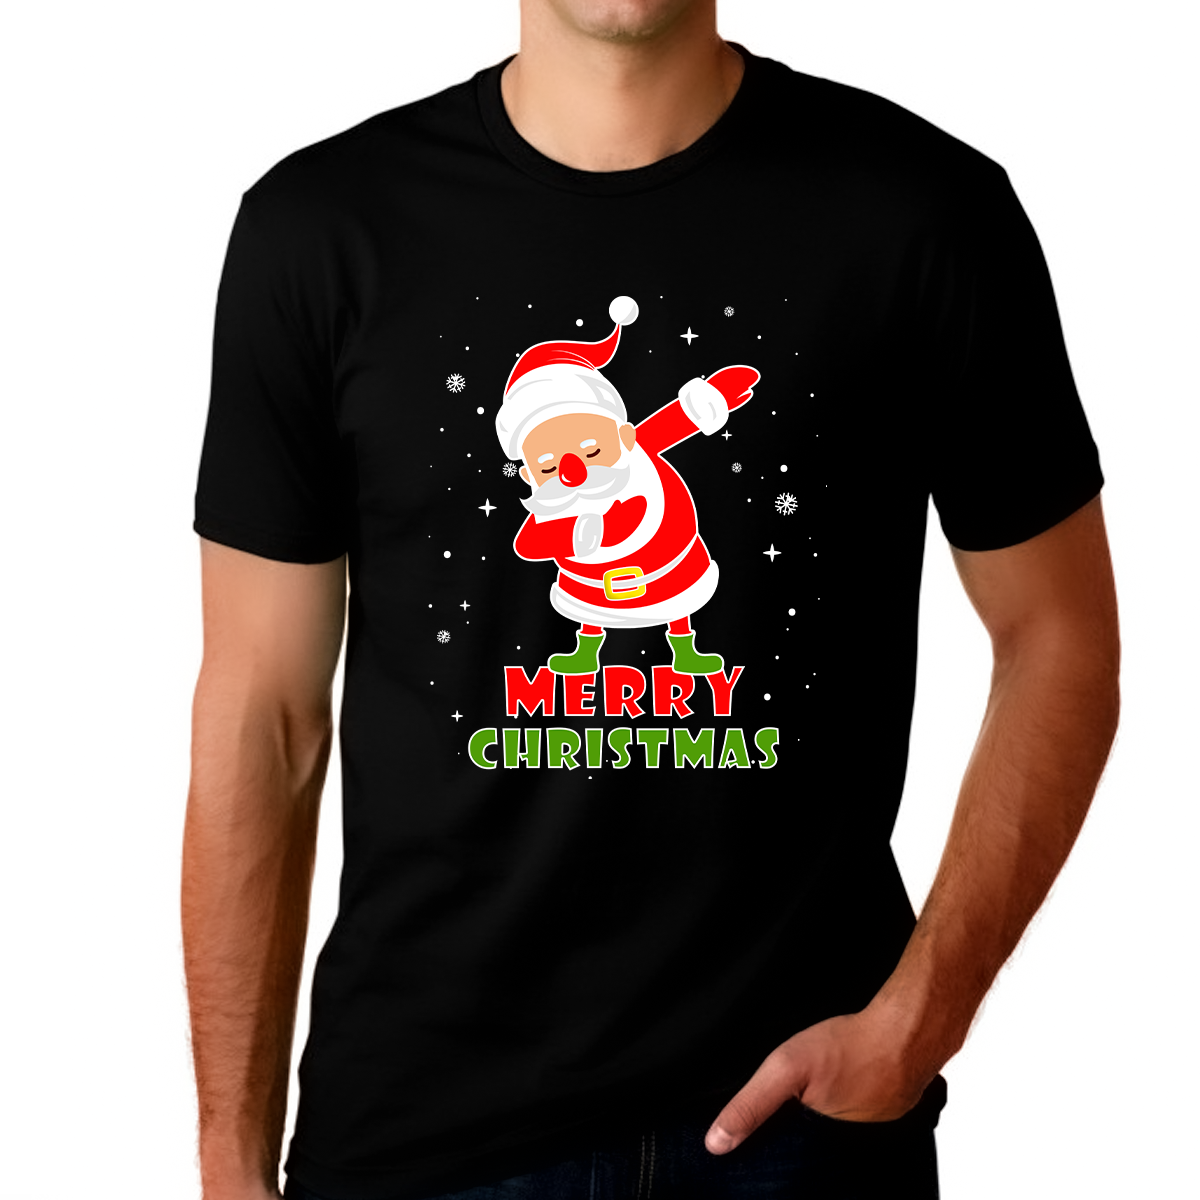 Fire Fit Designs Funny Christmas Shirts for Men Christmas Outfits for Men Merry Christmas Pajamas Shirt